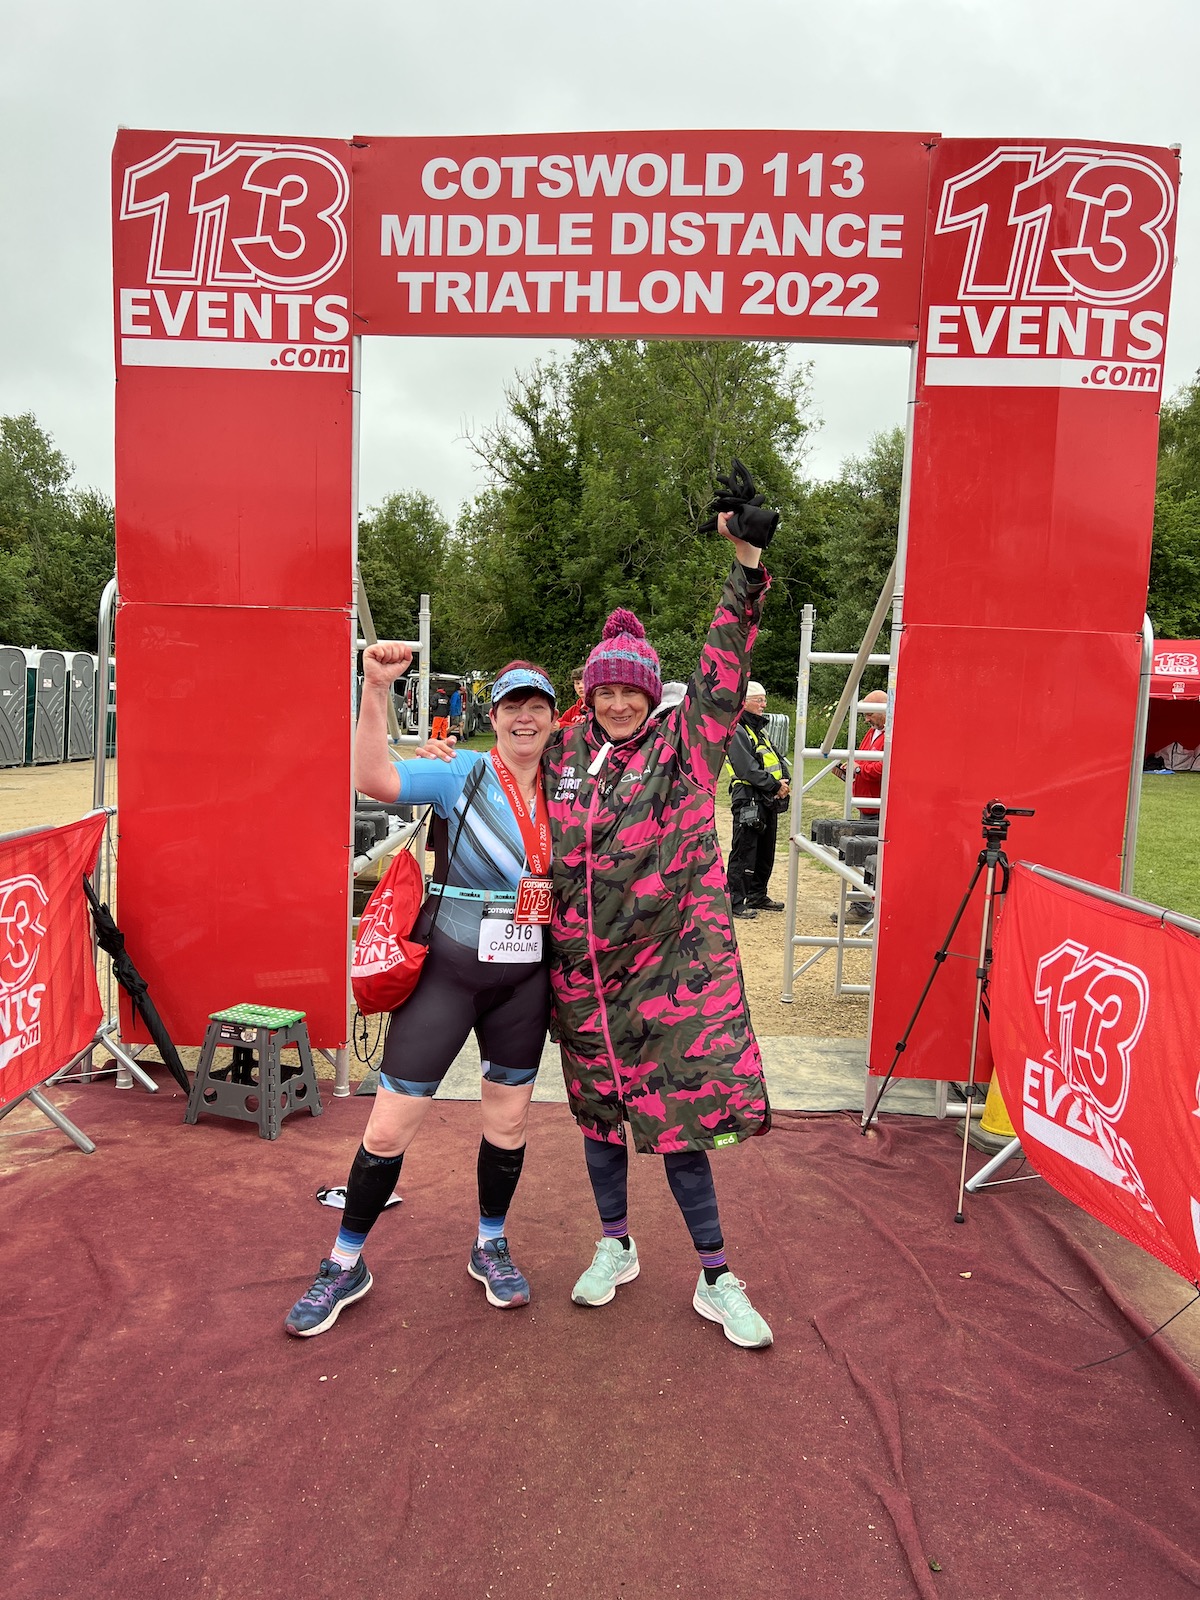 Louise Minchin with Caroline Bramwell, who has a stoma, having completed the Cotswold Middle Distance Triathlon